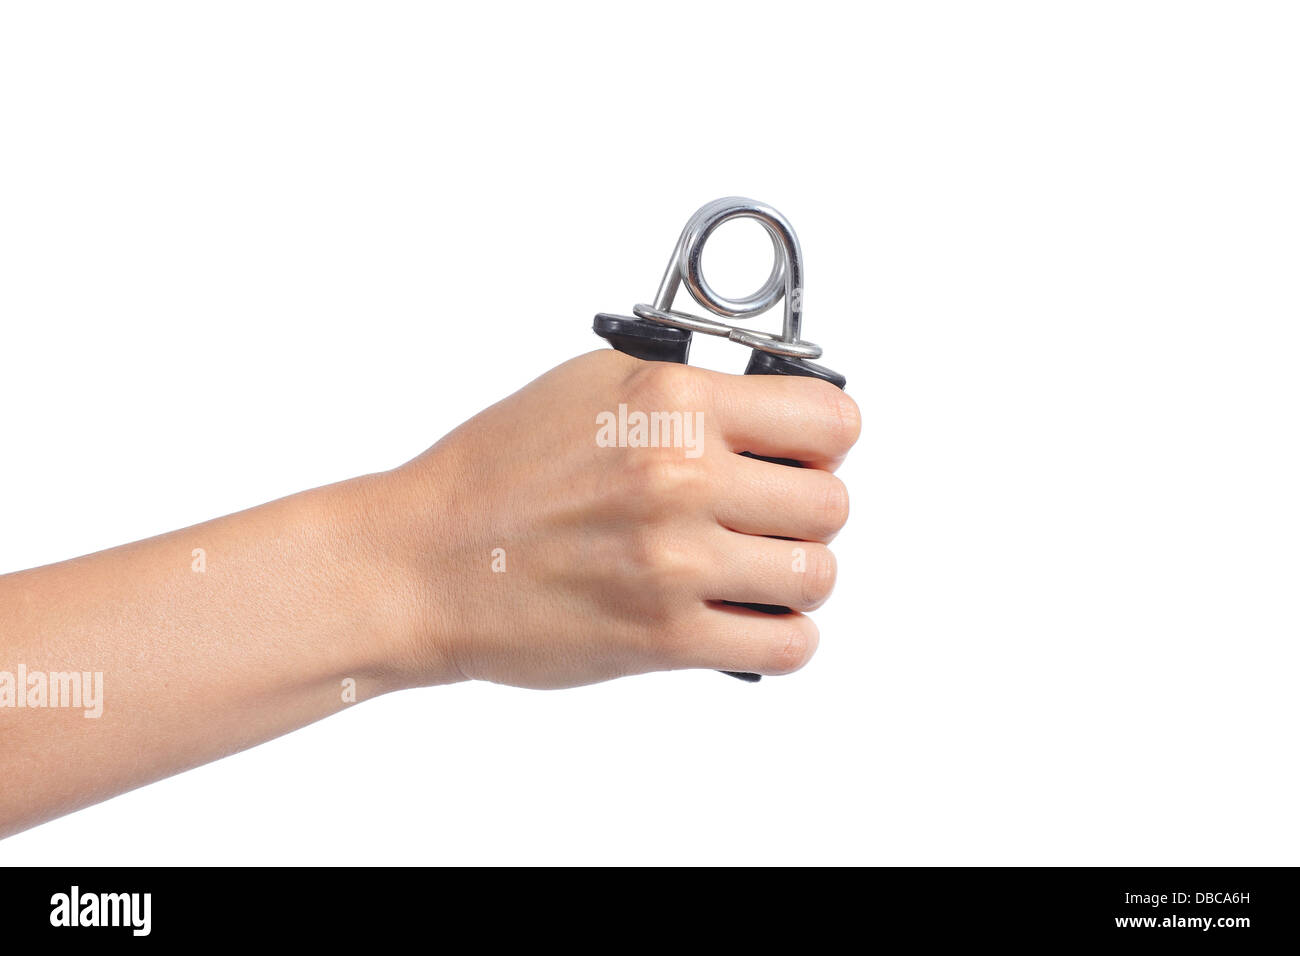 Woman hand holding and using a hand grip isolated on a white background Stock Photo